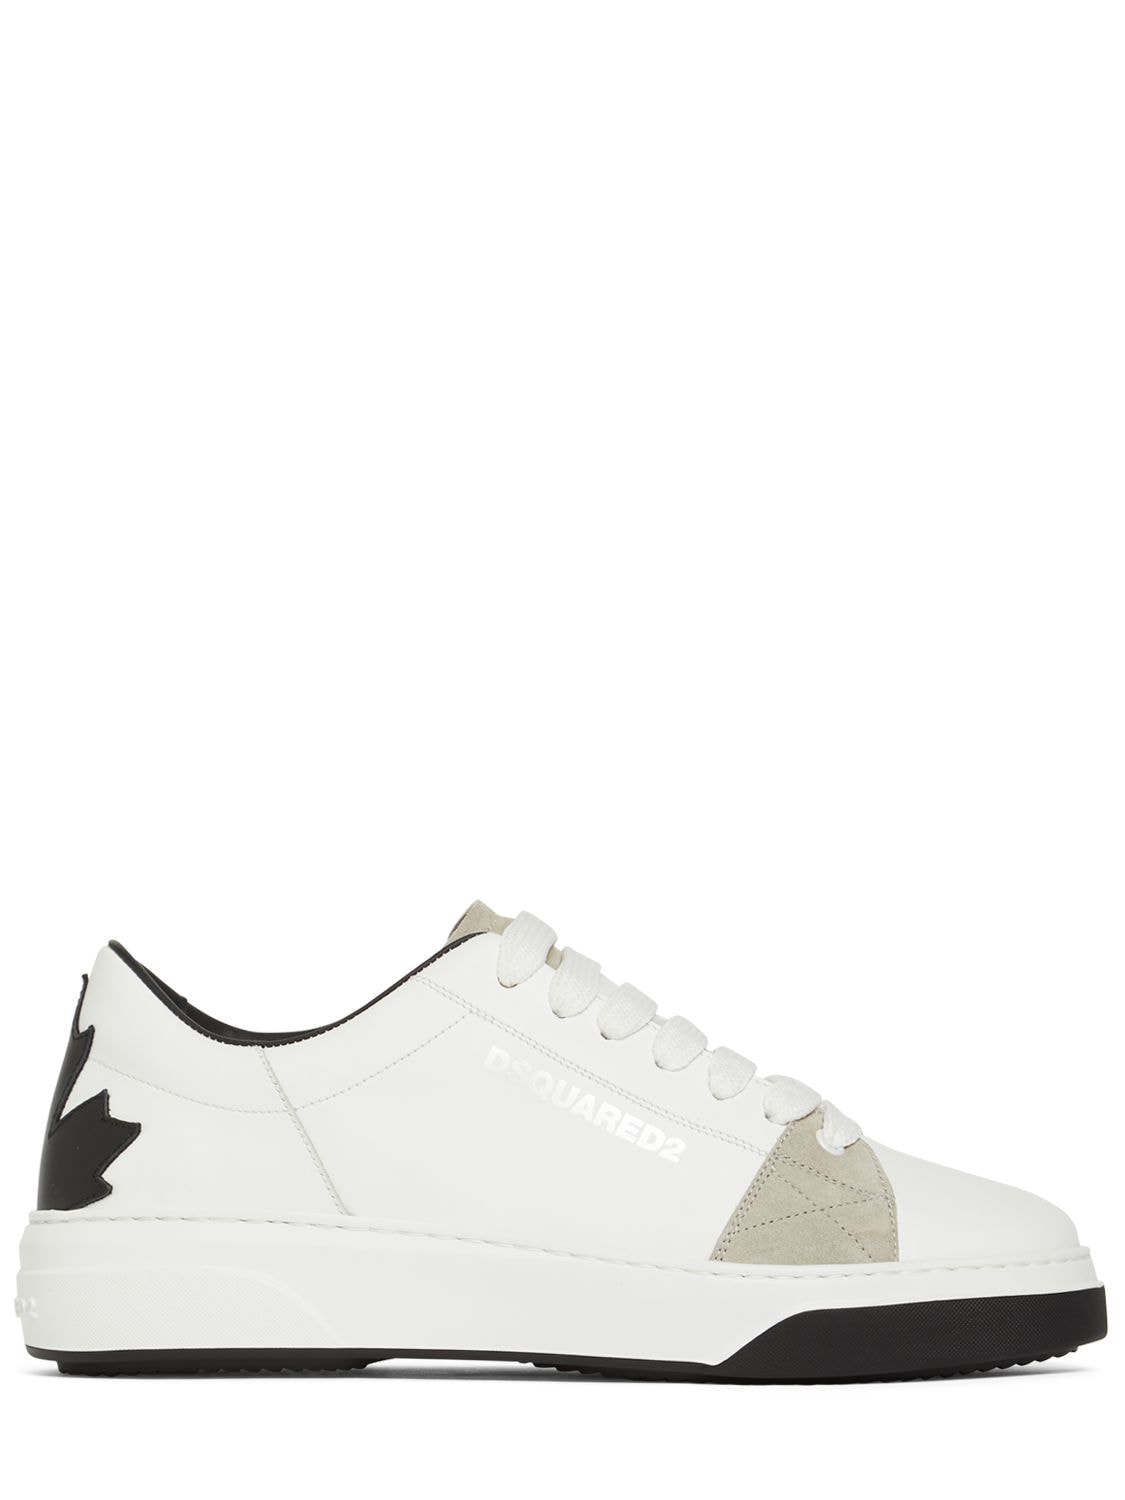 DSQUARED2 MAPLE LEAF LEATHER SNEAKERS